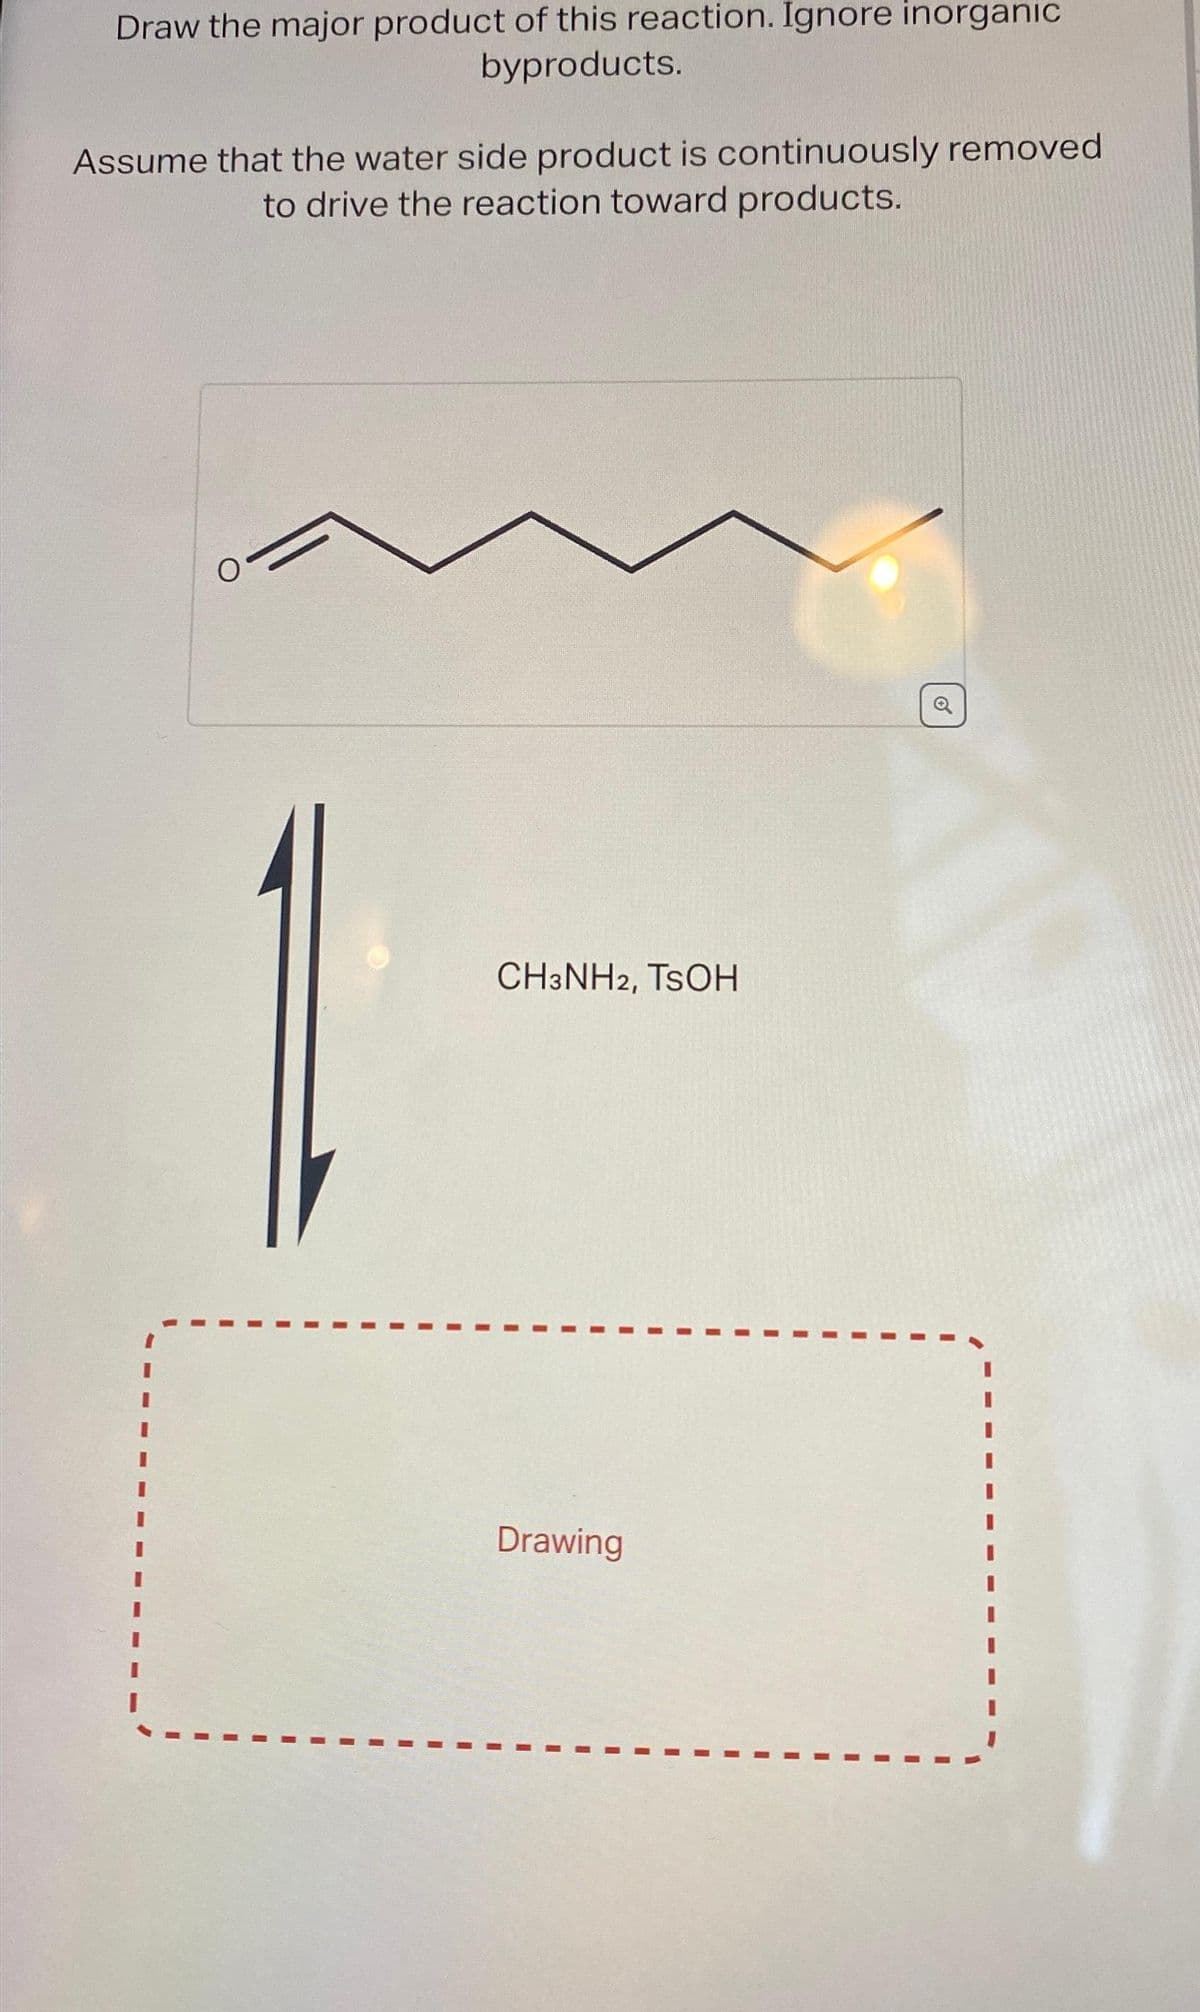 Draw the major product of this reaction. Ignore inorganic
byproducts.
Assume that the water side product is continuously removed
to drive the reaction toward products.
I
I
I
CH3NH2, TSOH
I
Drawing
I
I